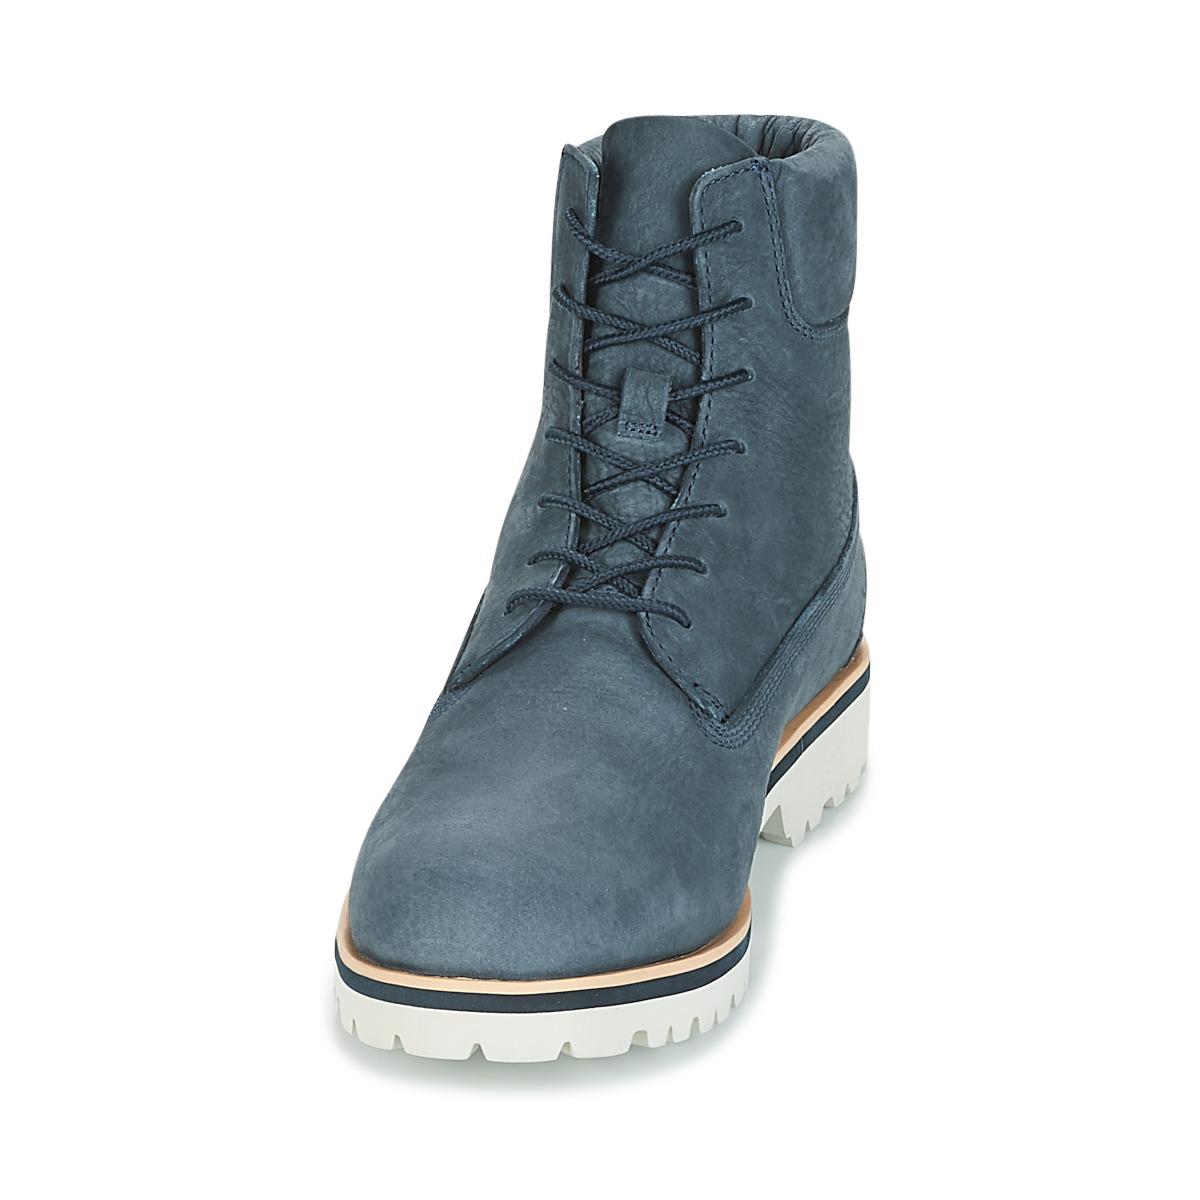 Chaussures Boots Timberland homme Chilmark 6 Boot Midnight taille Bleu  marine innovatis-suisse.ch